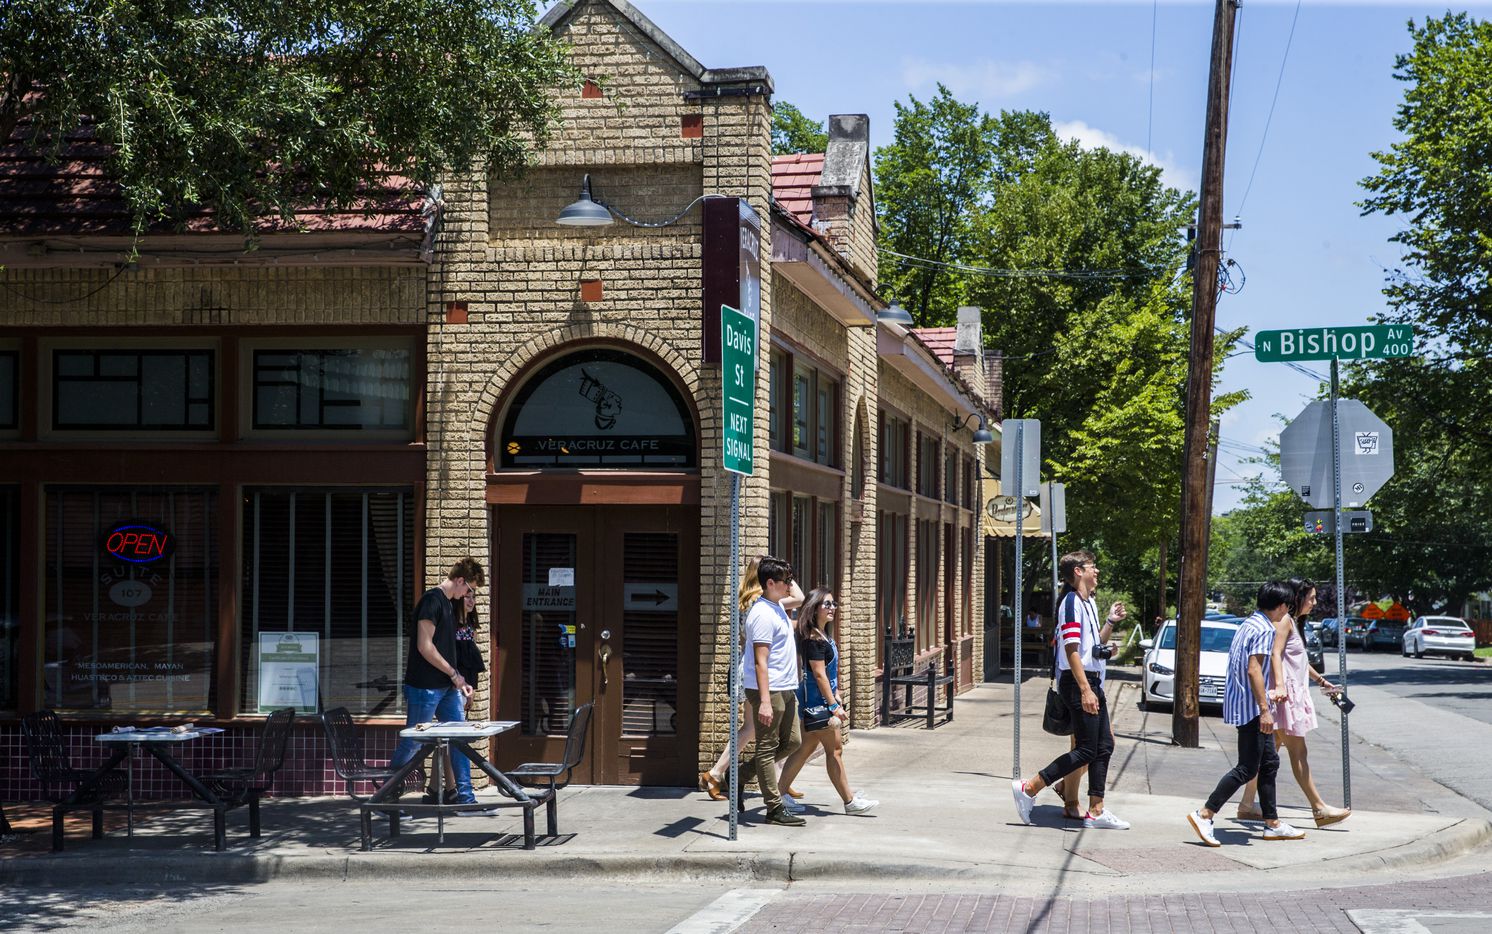 People walked among the shops and restaurants in the Bishop Arts District in June 2017.